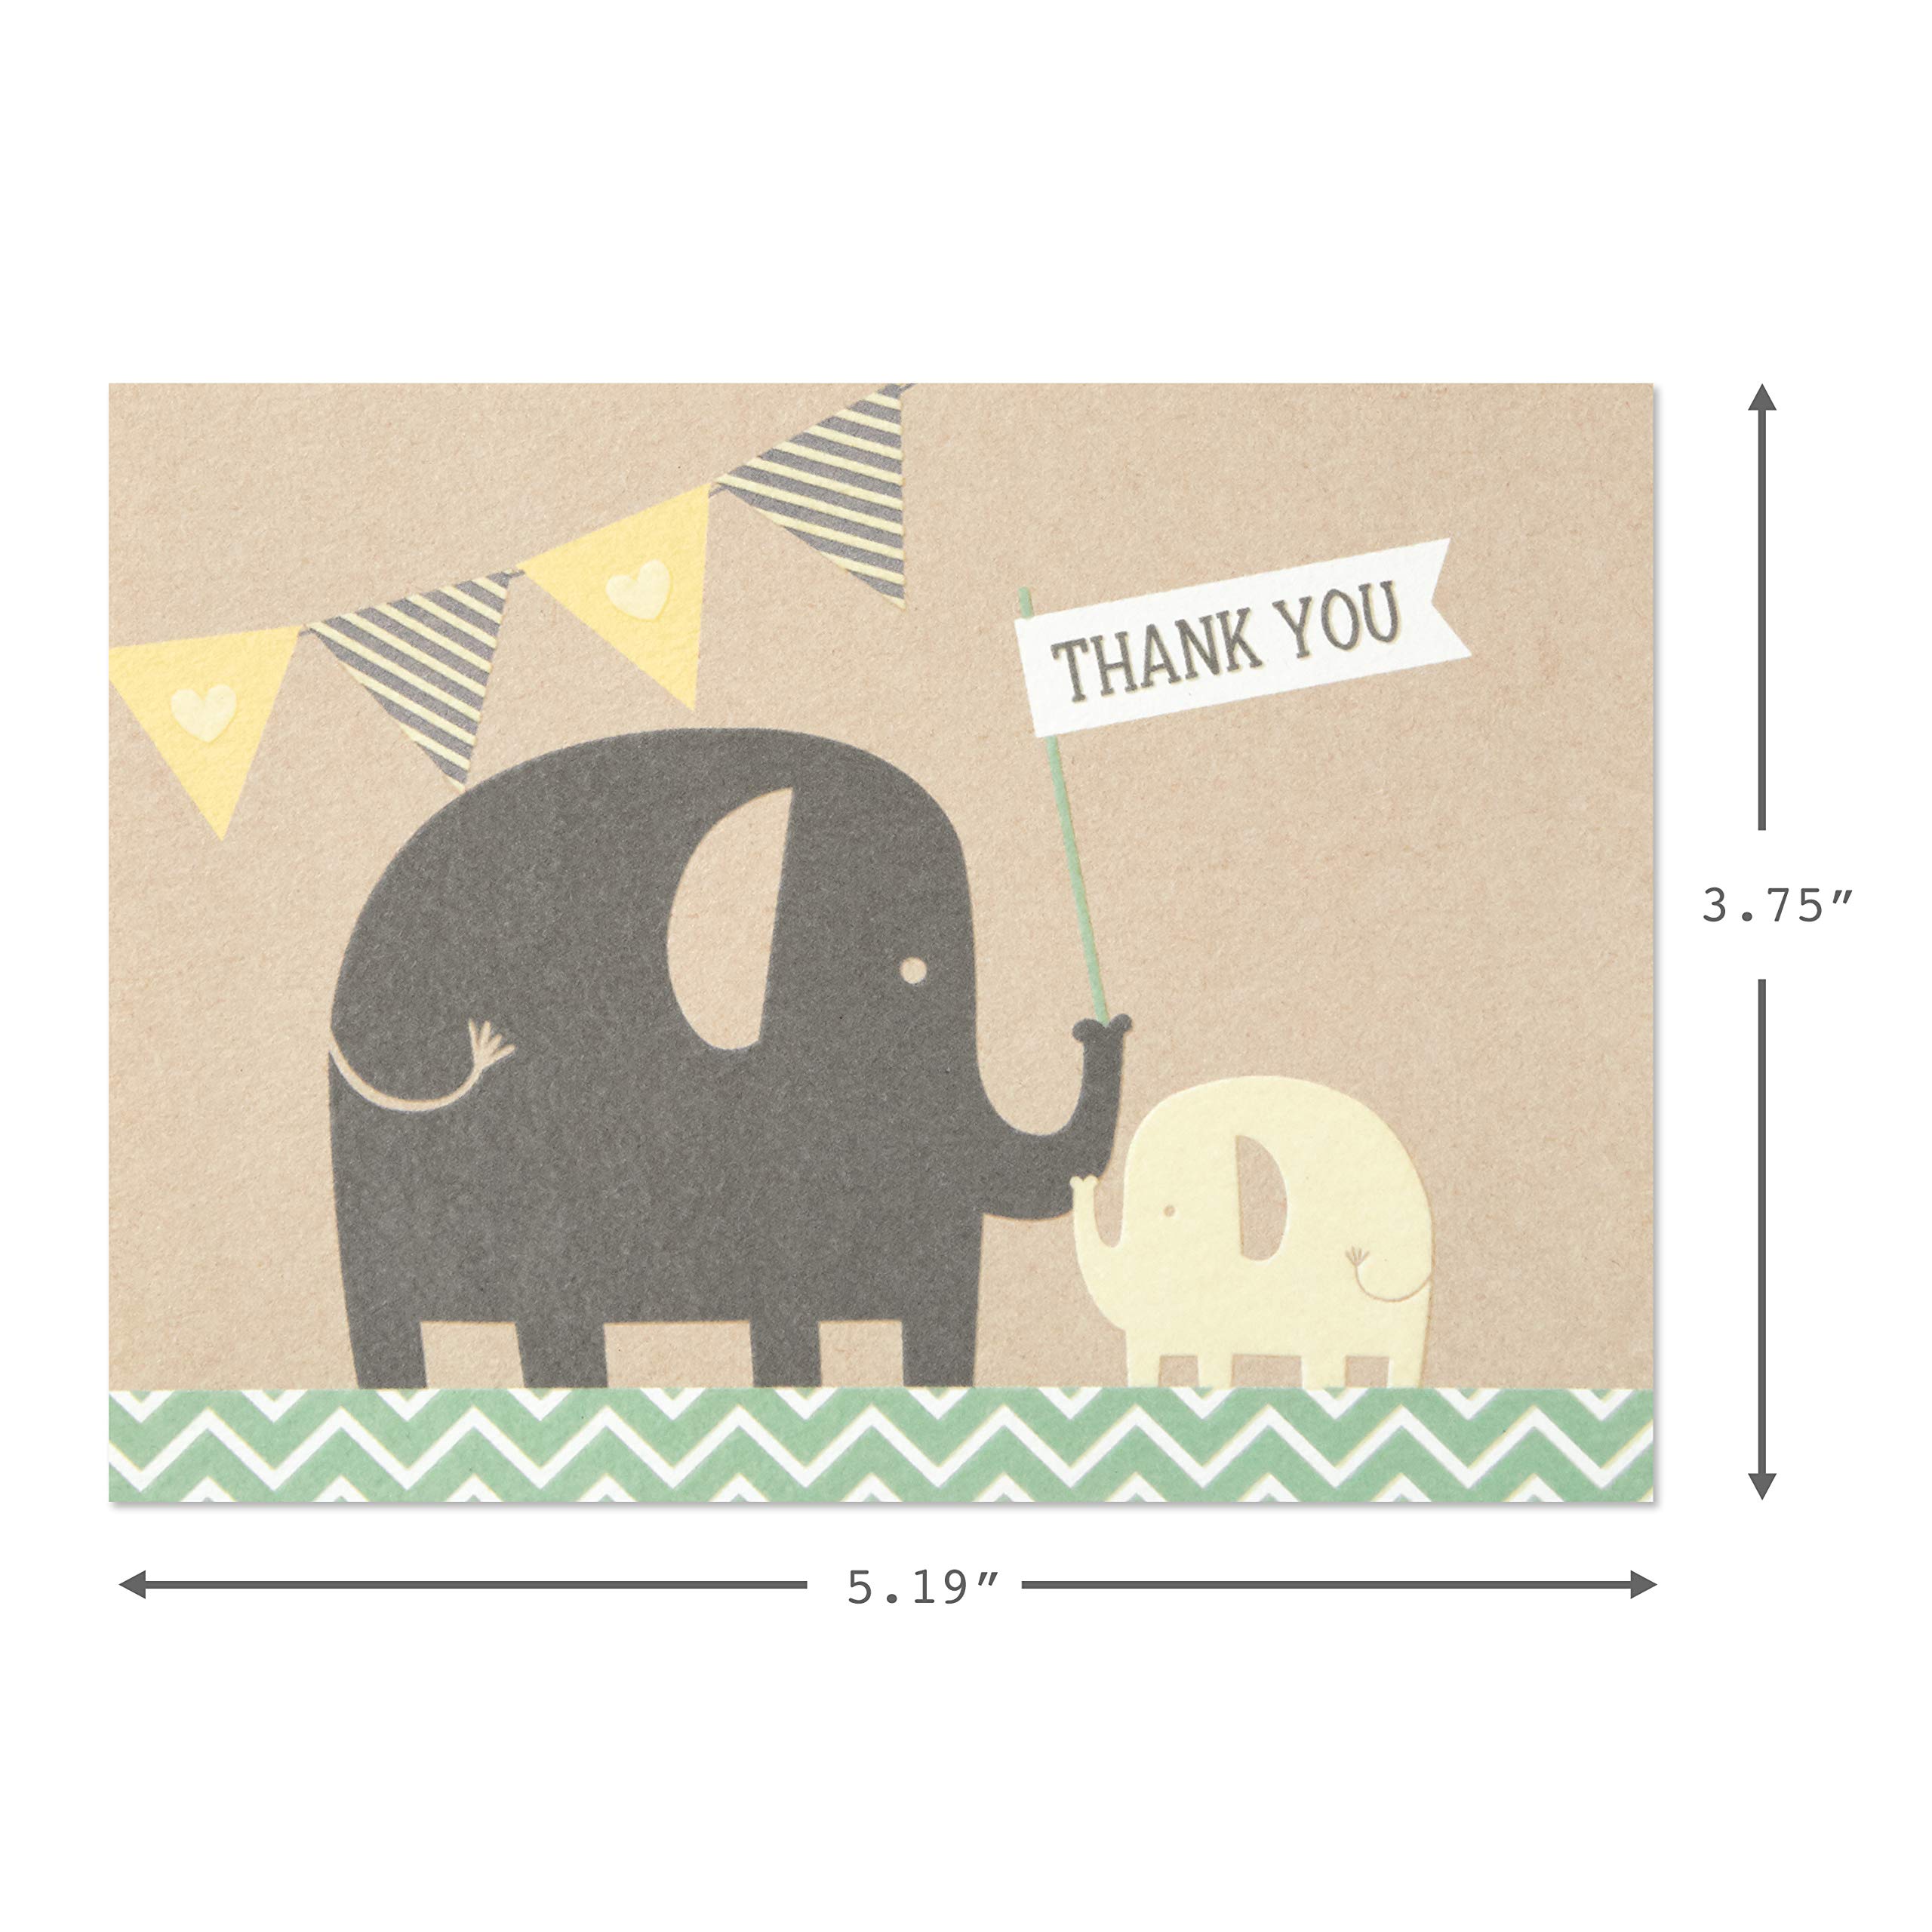 Hallmark Baby Thank You Cards, Elephants (10 Cards with Envelopes)